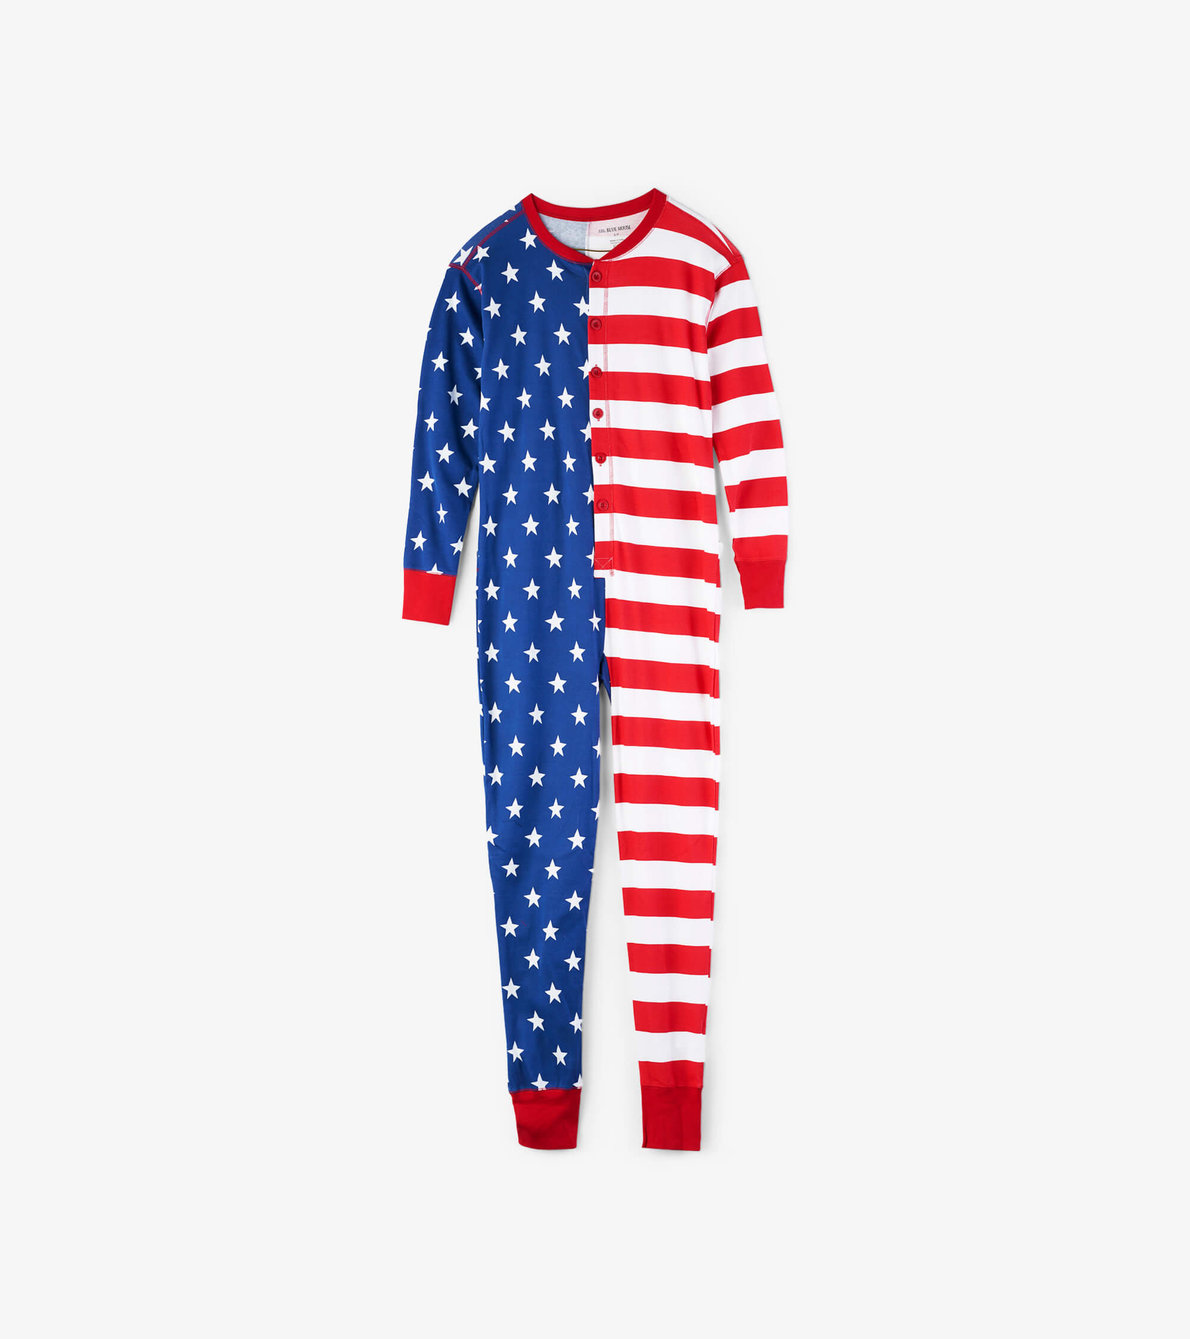 View larger image of USA Flag Adult Union Suit